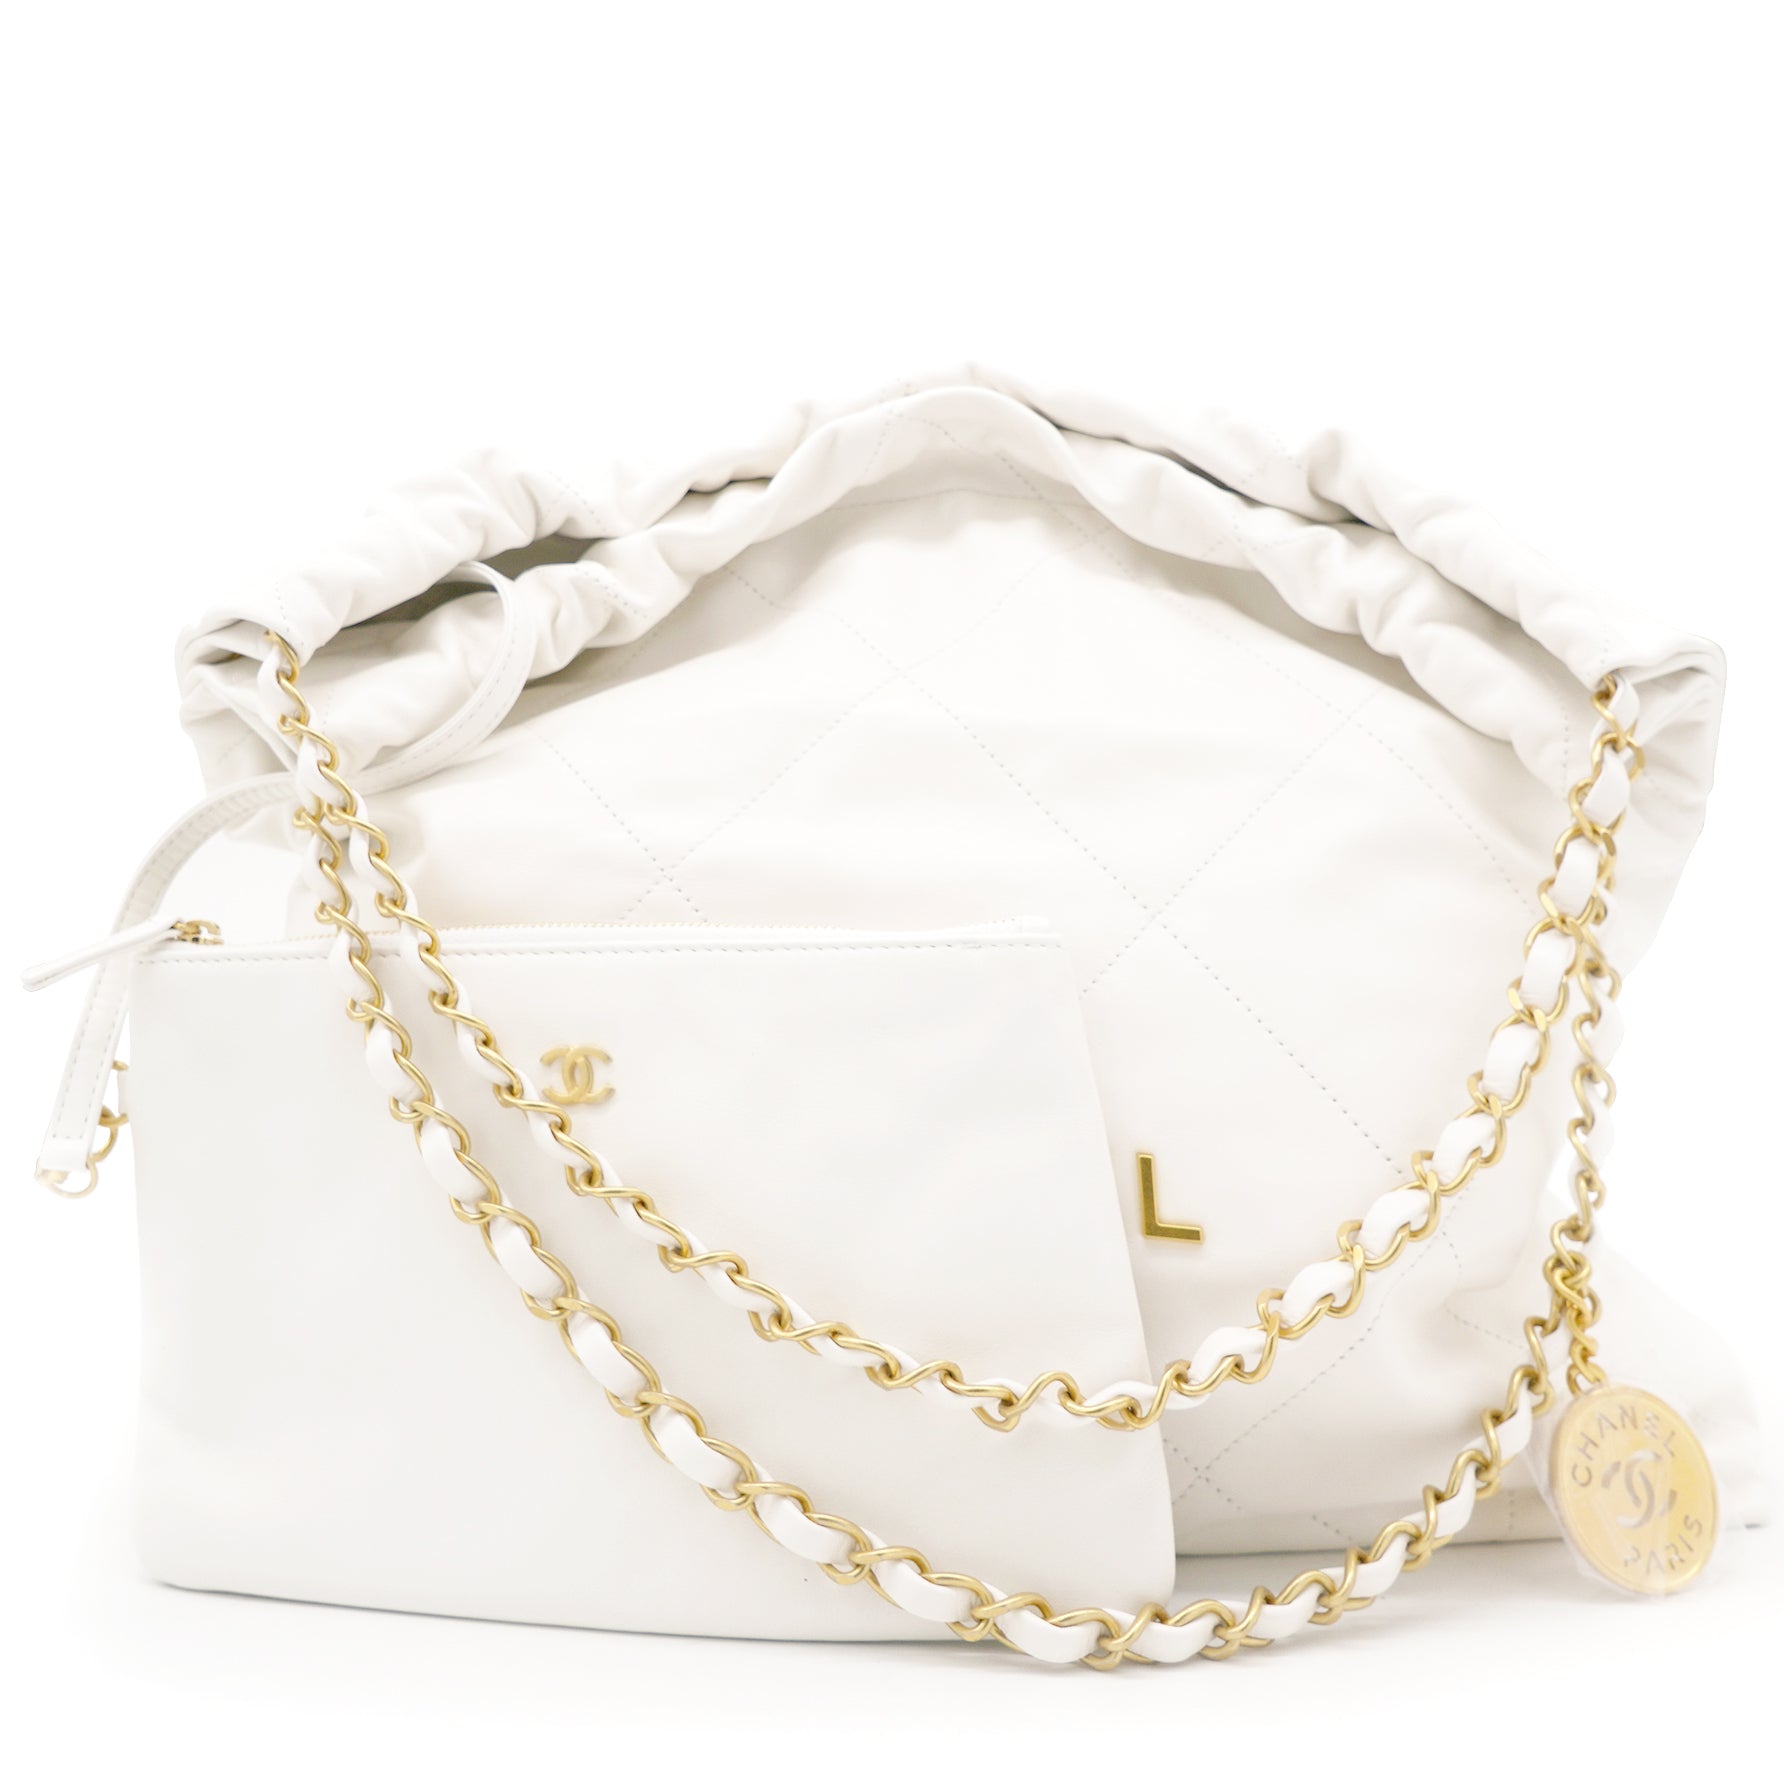 CHANEL Lambskin Quilted Mini Bucket Bag With Chain White 781415